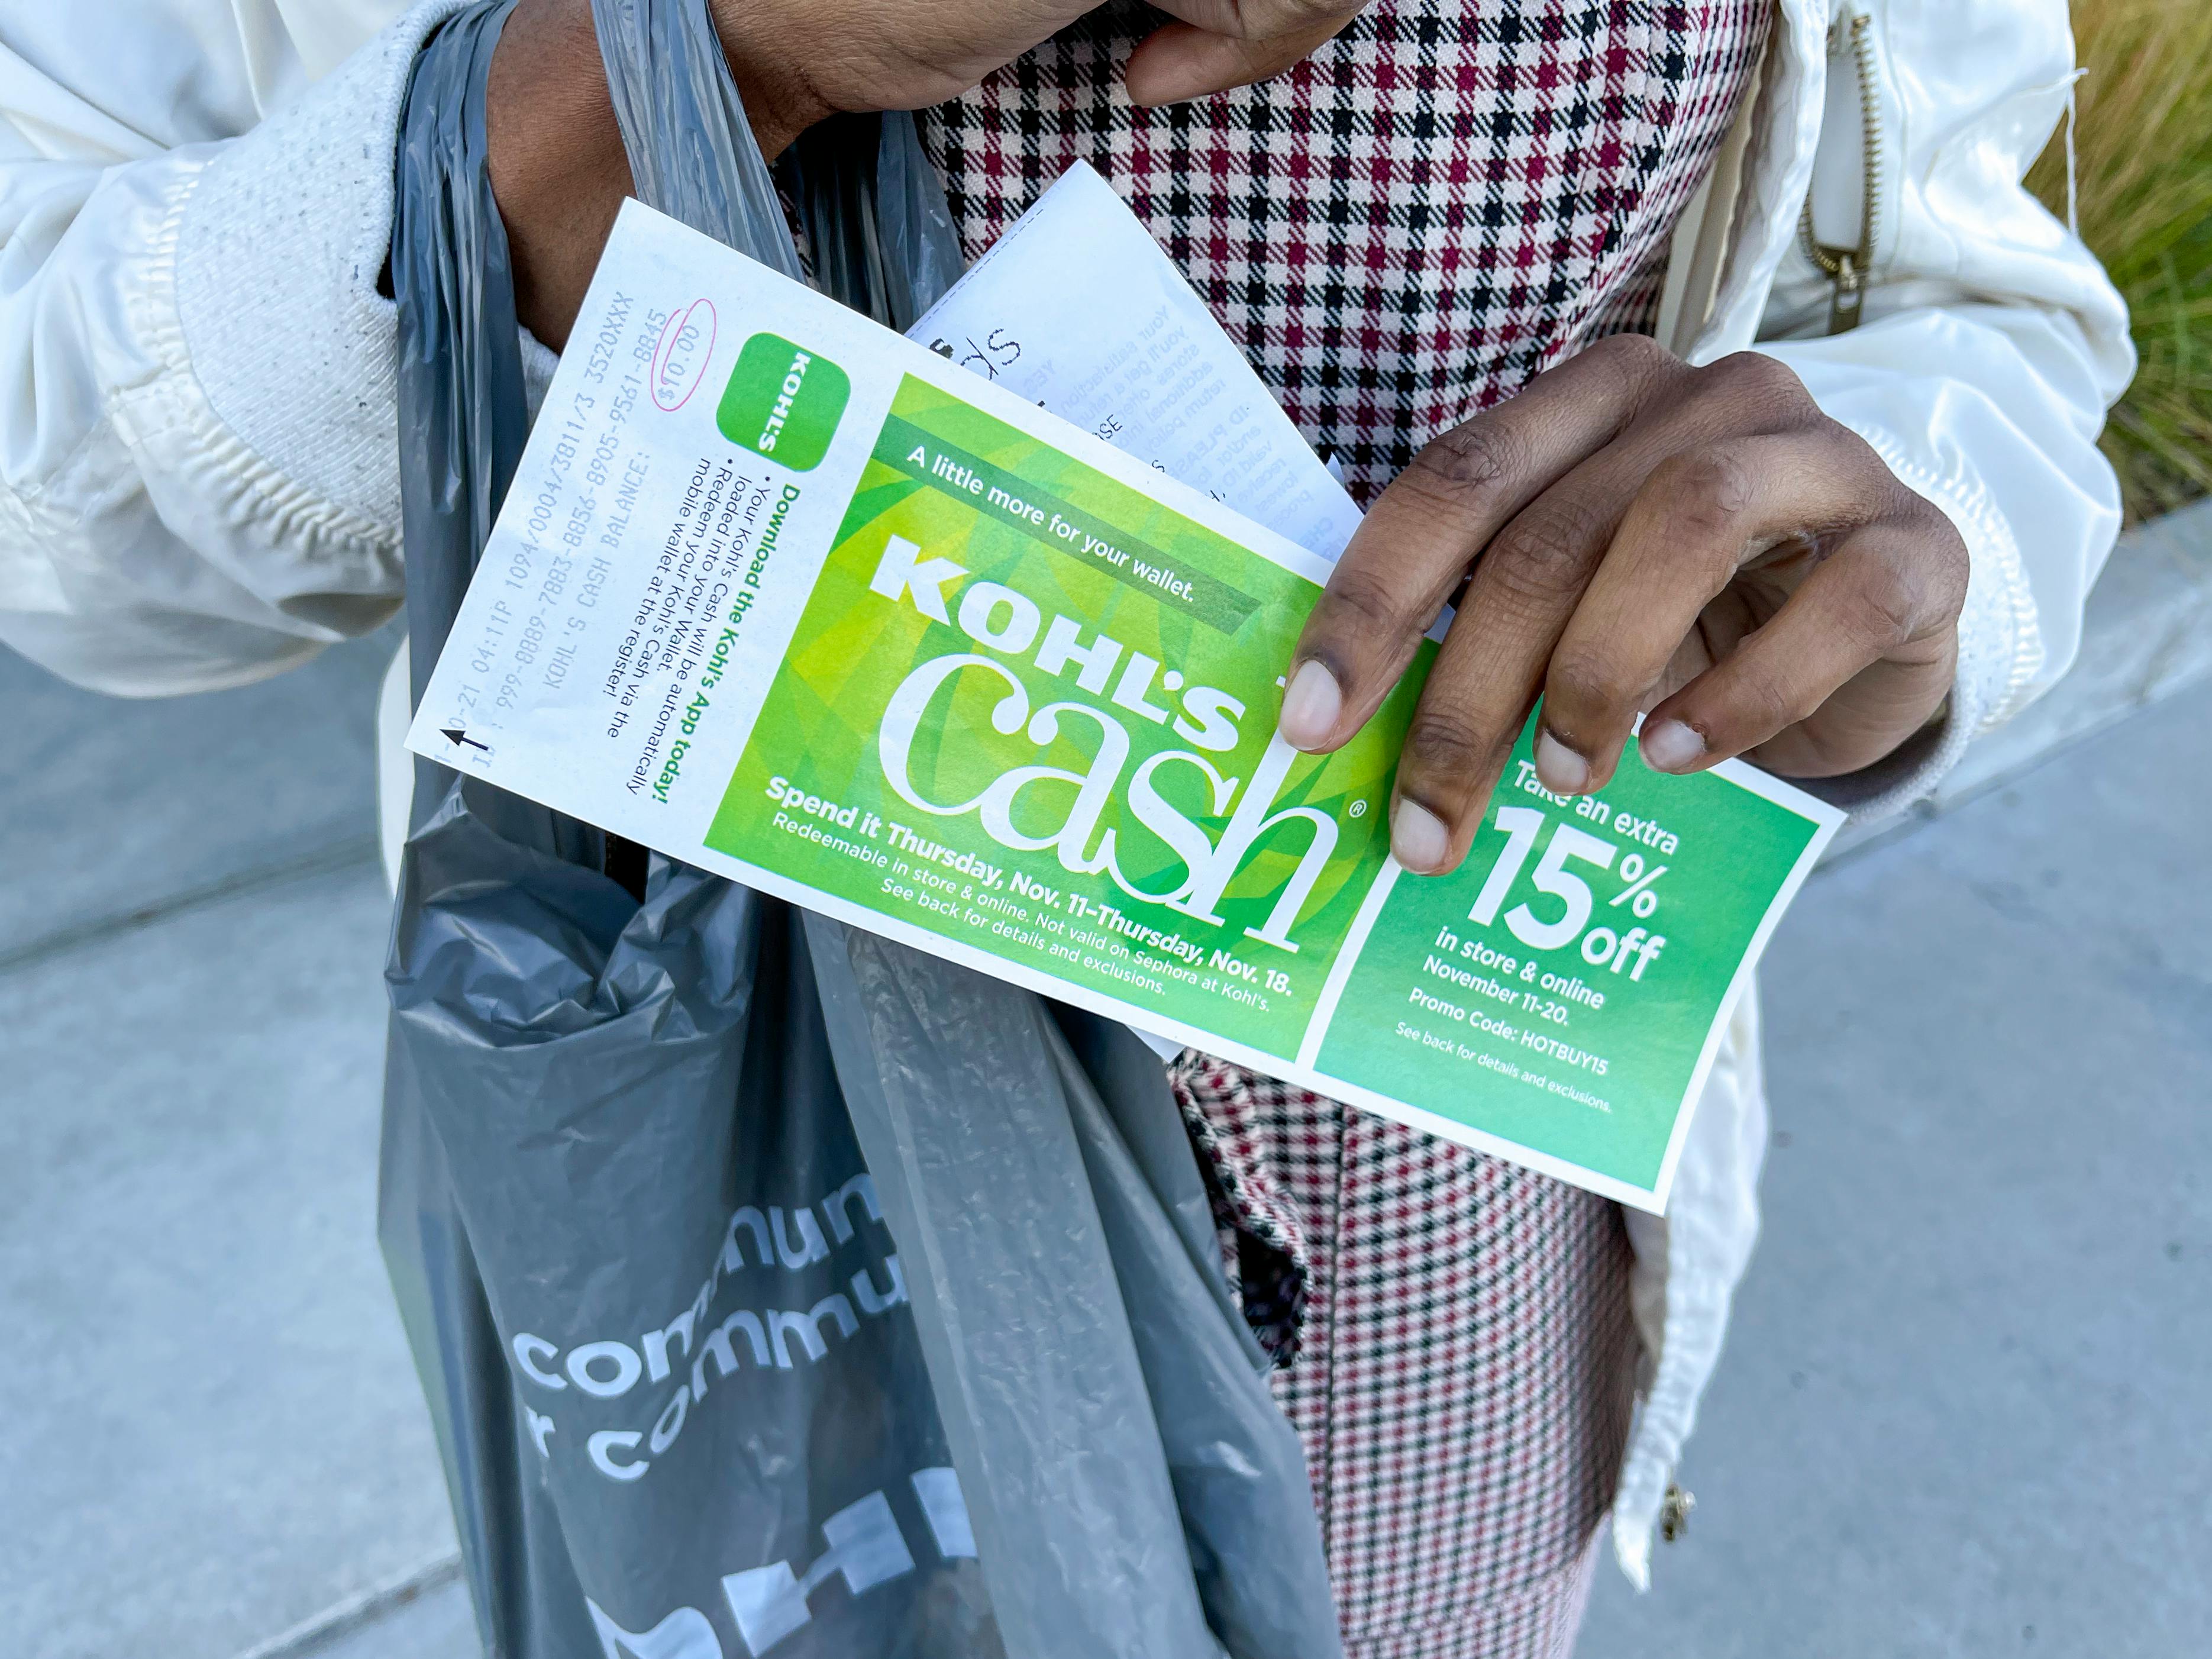 Hello, Kohl's Cash! How to Use Kohl's Free Money - The Krazy Coupon Lady